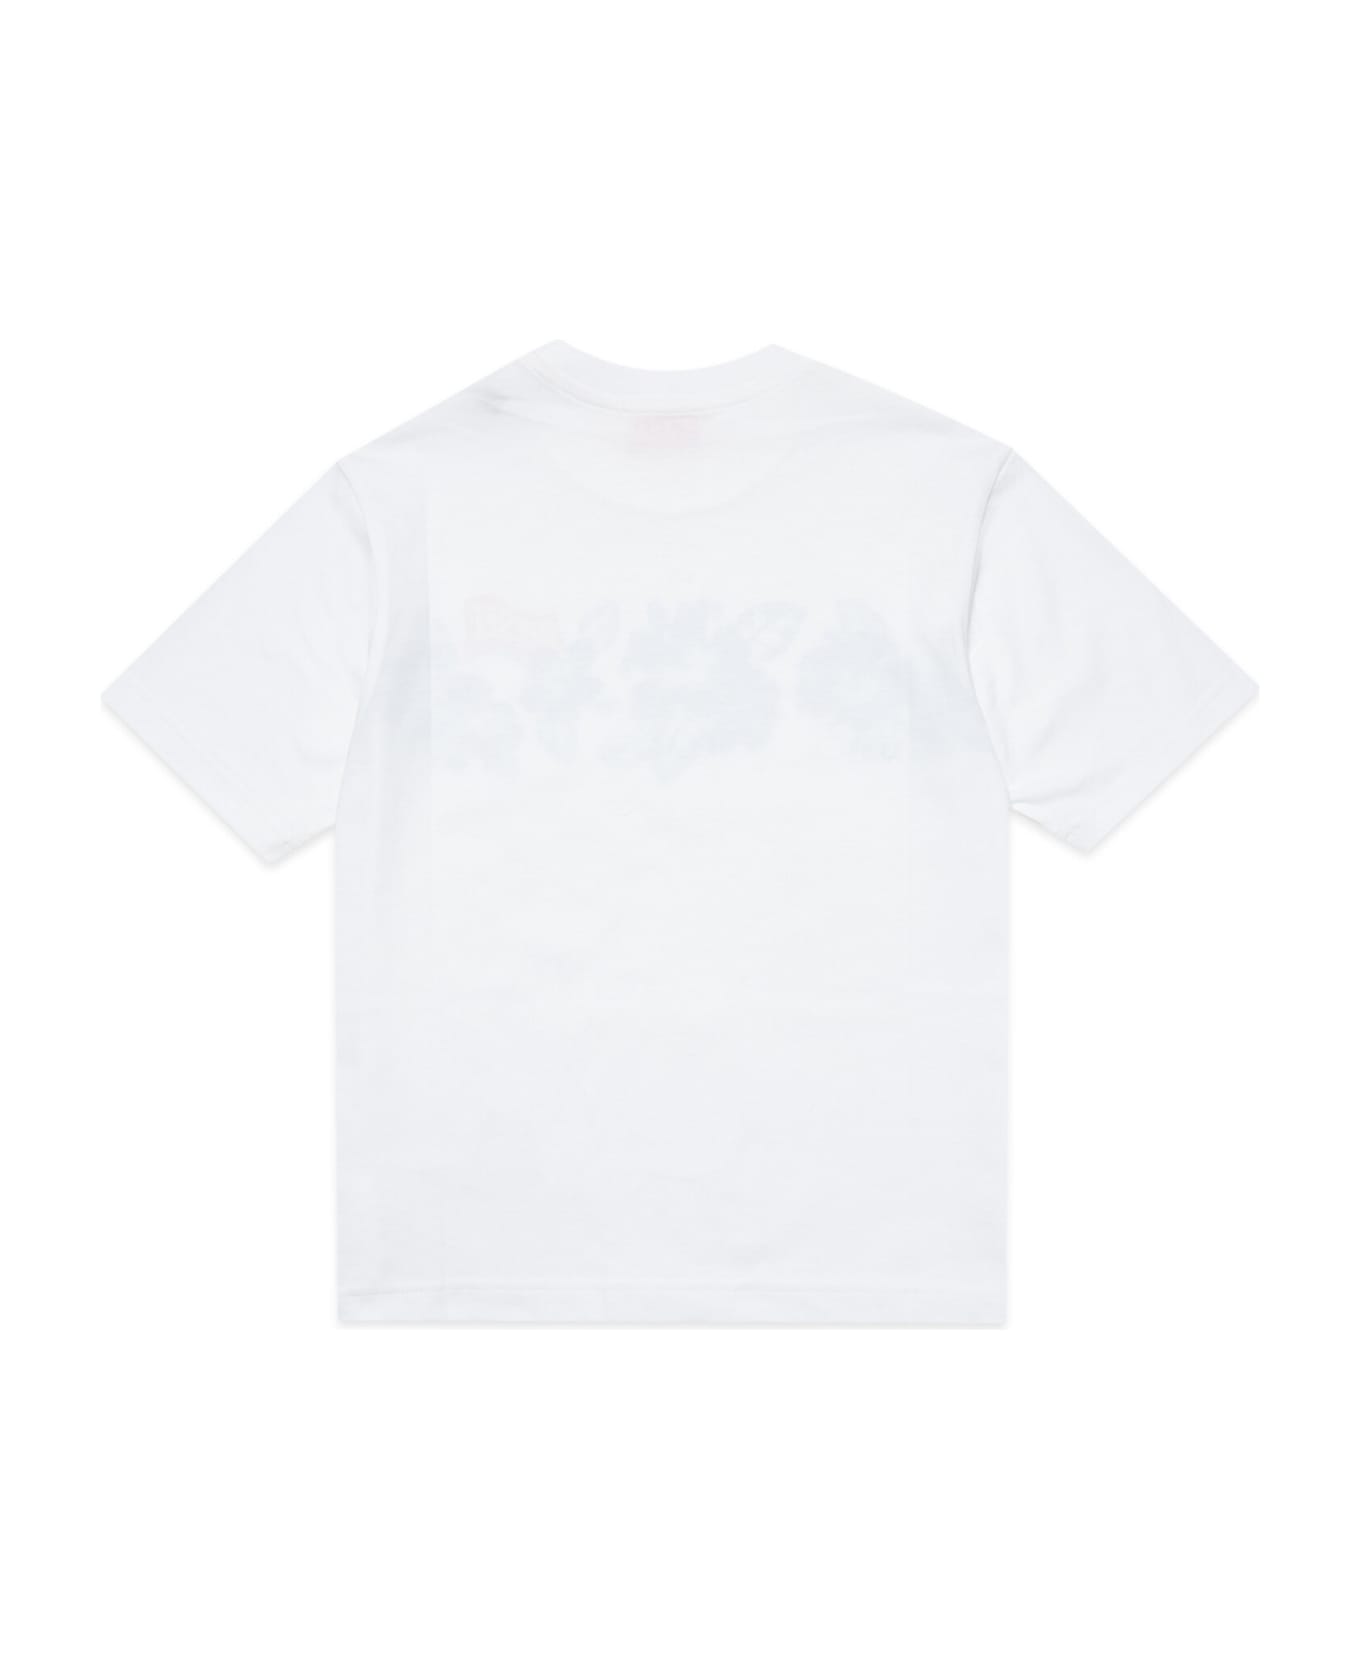 Diesel Tyros Over T-shirt Diesel White Jersey T-shirt With Floral Print - White